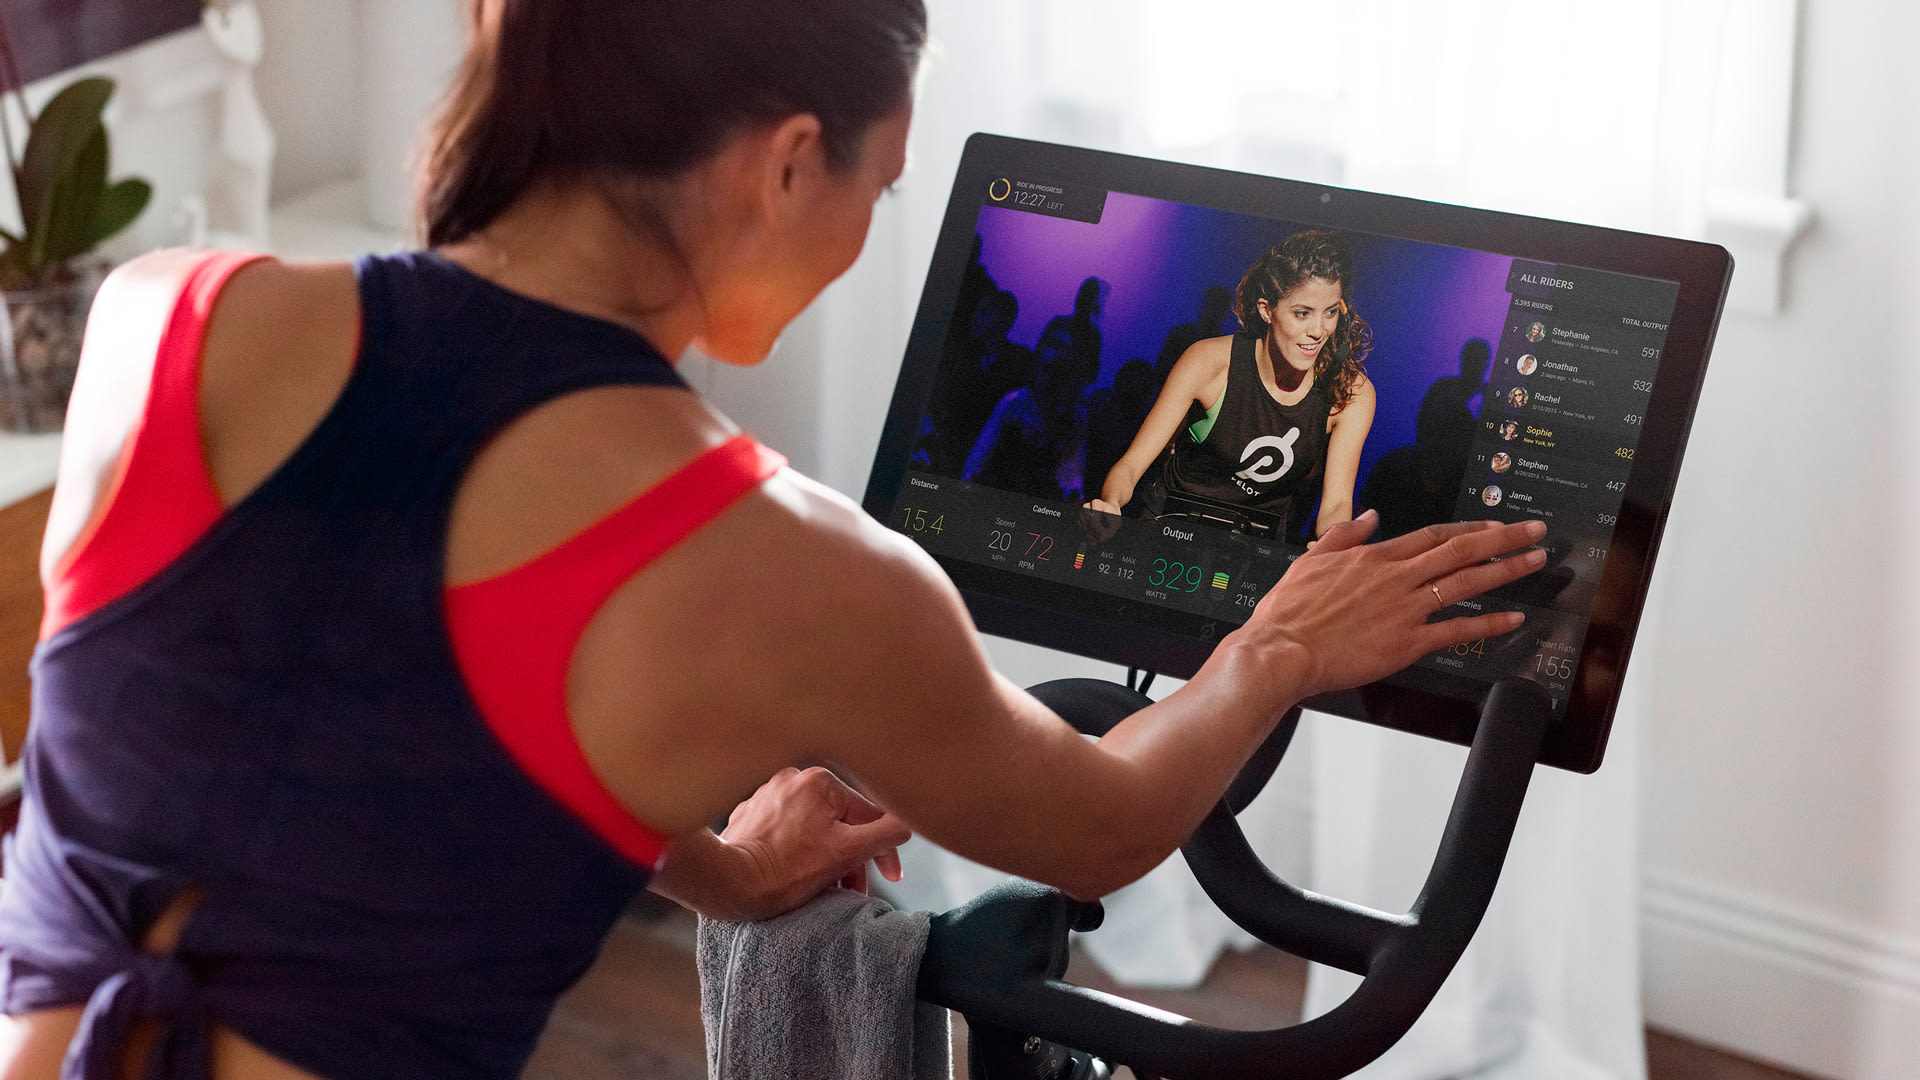 Exclusive: Will Americans ditch the gym for the Peloton model? Survey sheds light